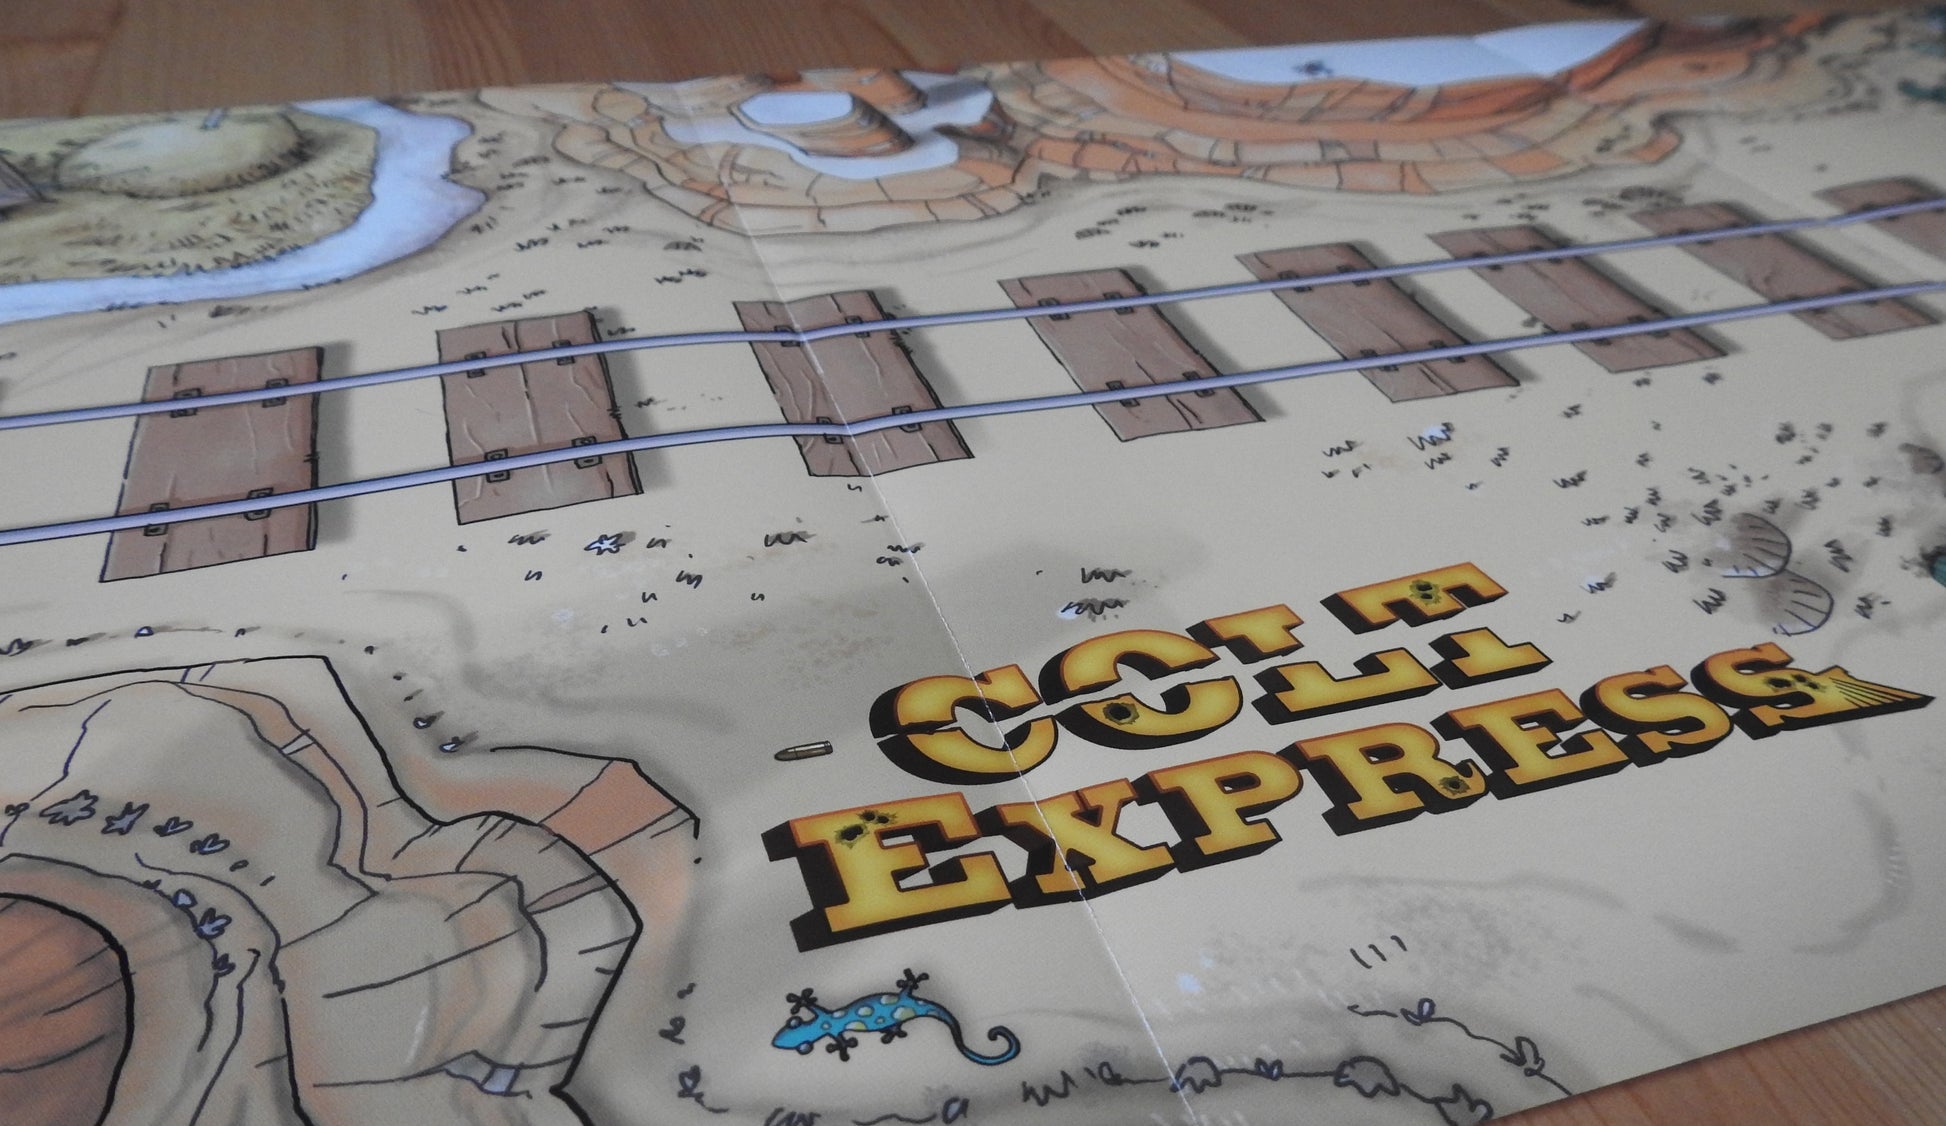 Close-up view of the tracks next to the Colt Express logo.